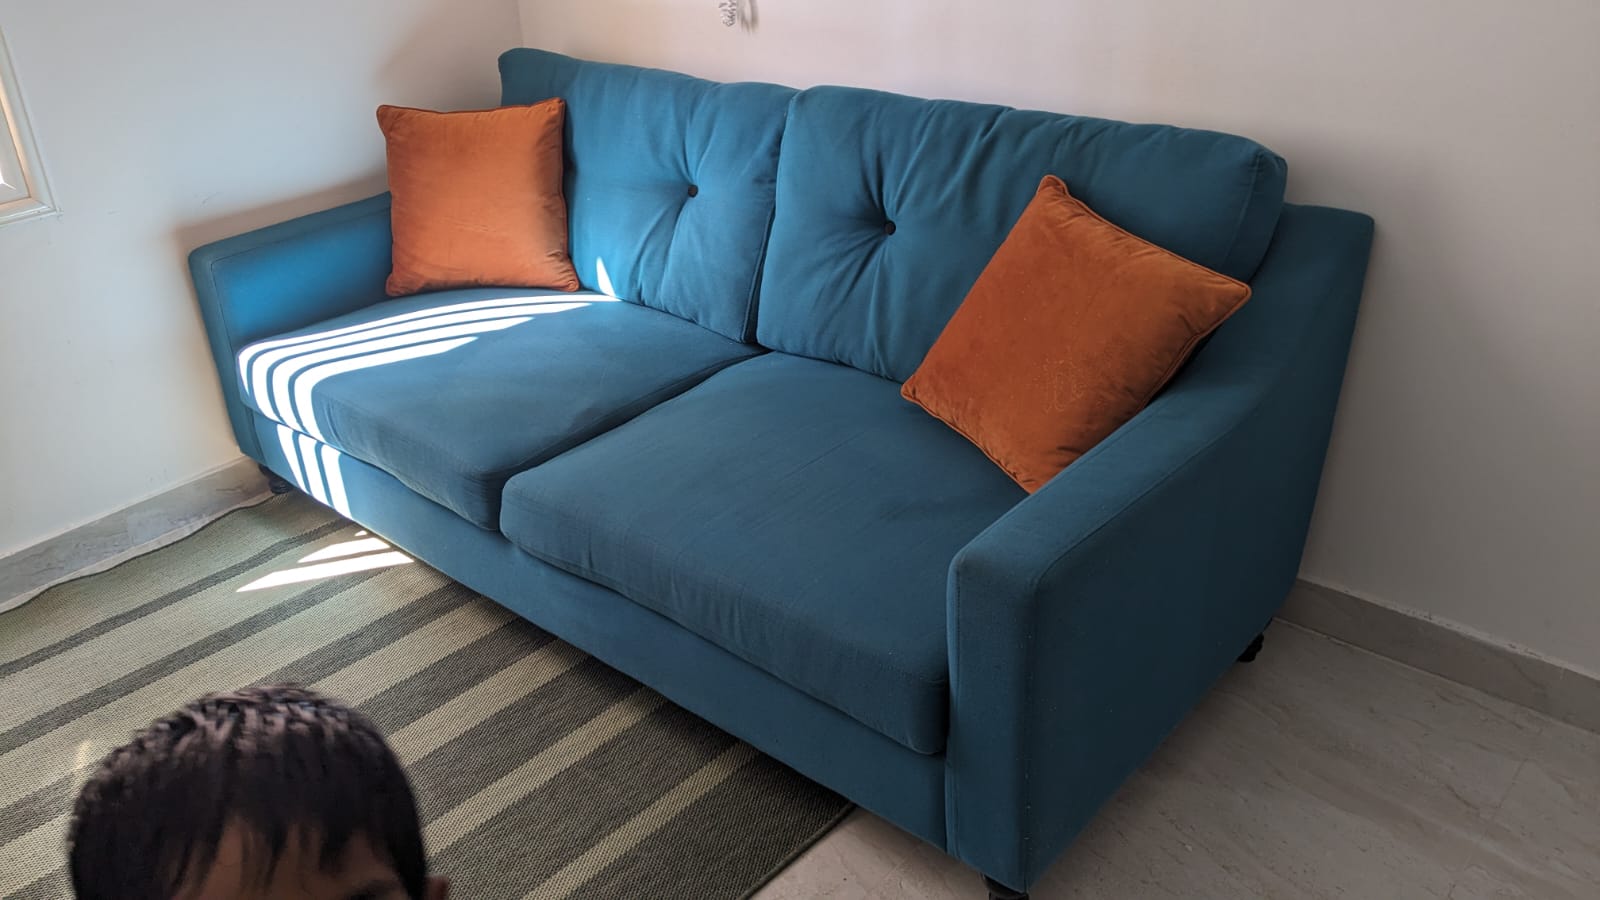 15days old sofa for sale